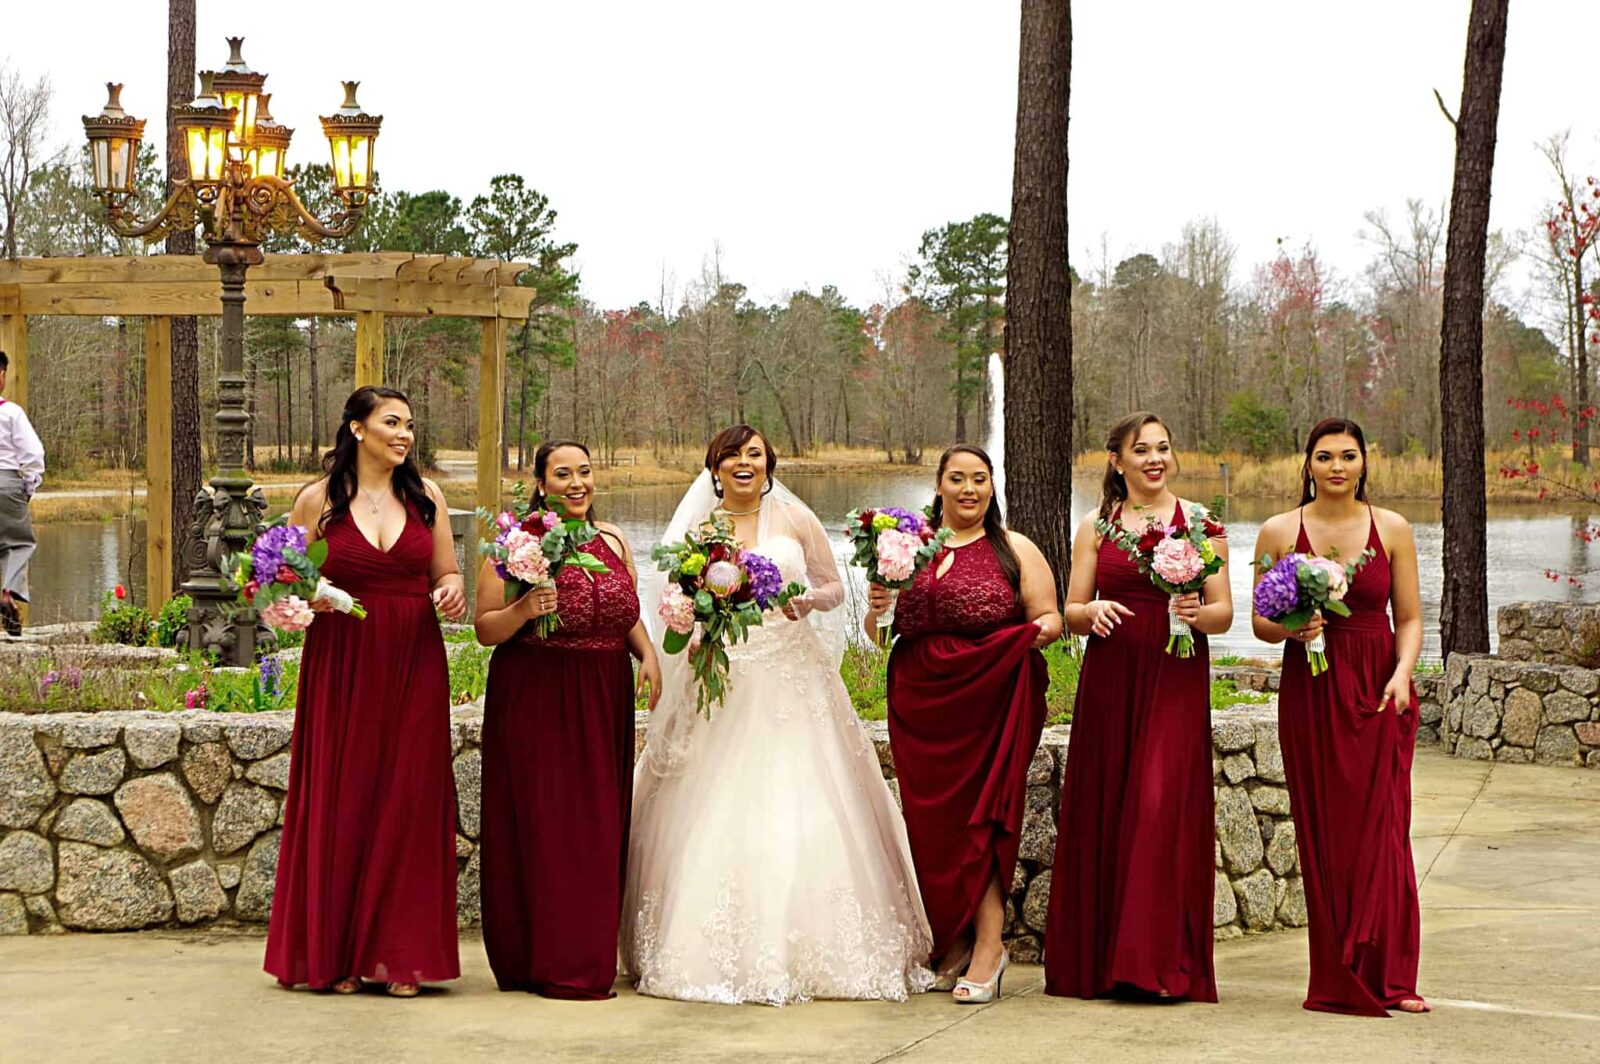 A group of women in red dresses standing next to each other.